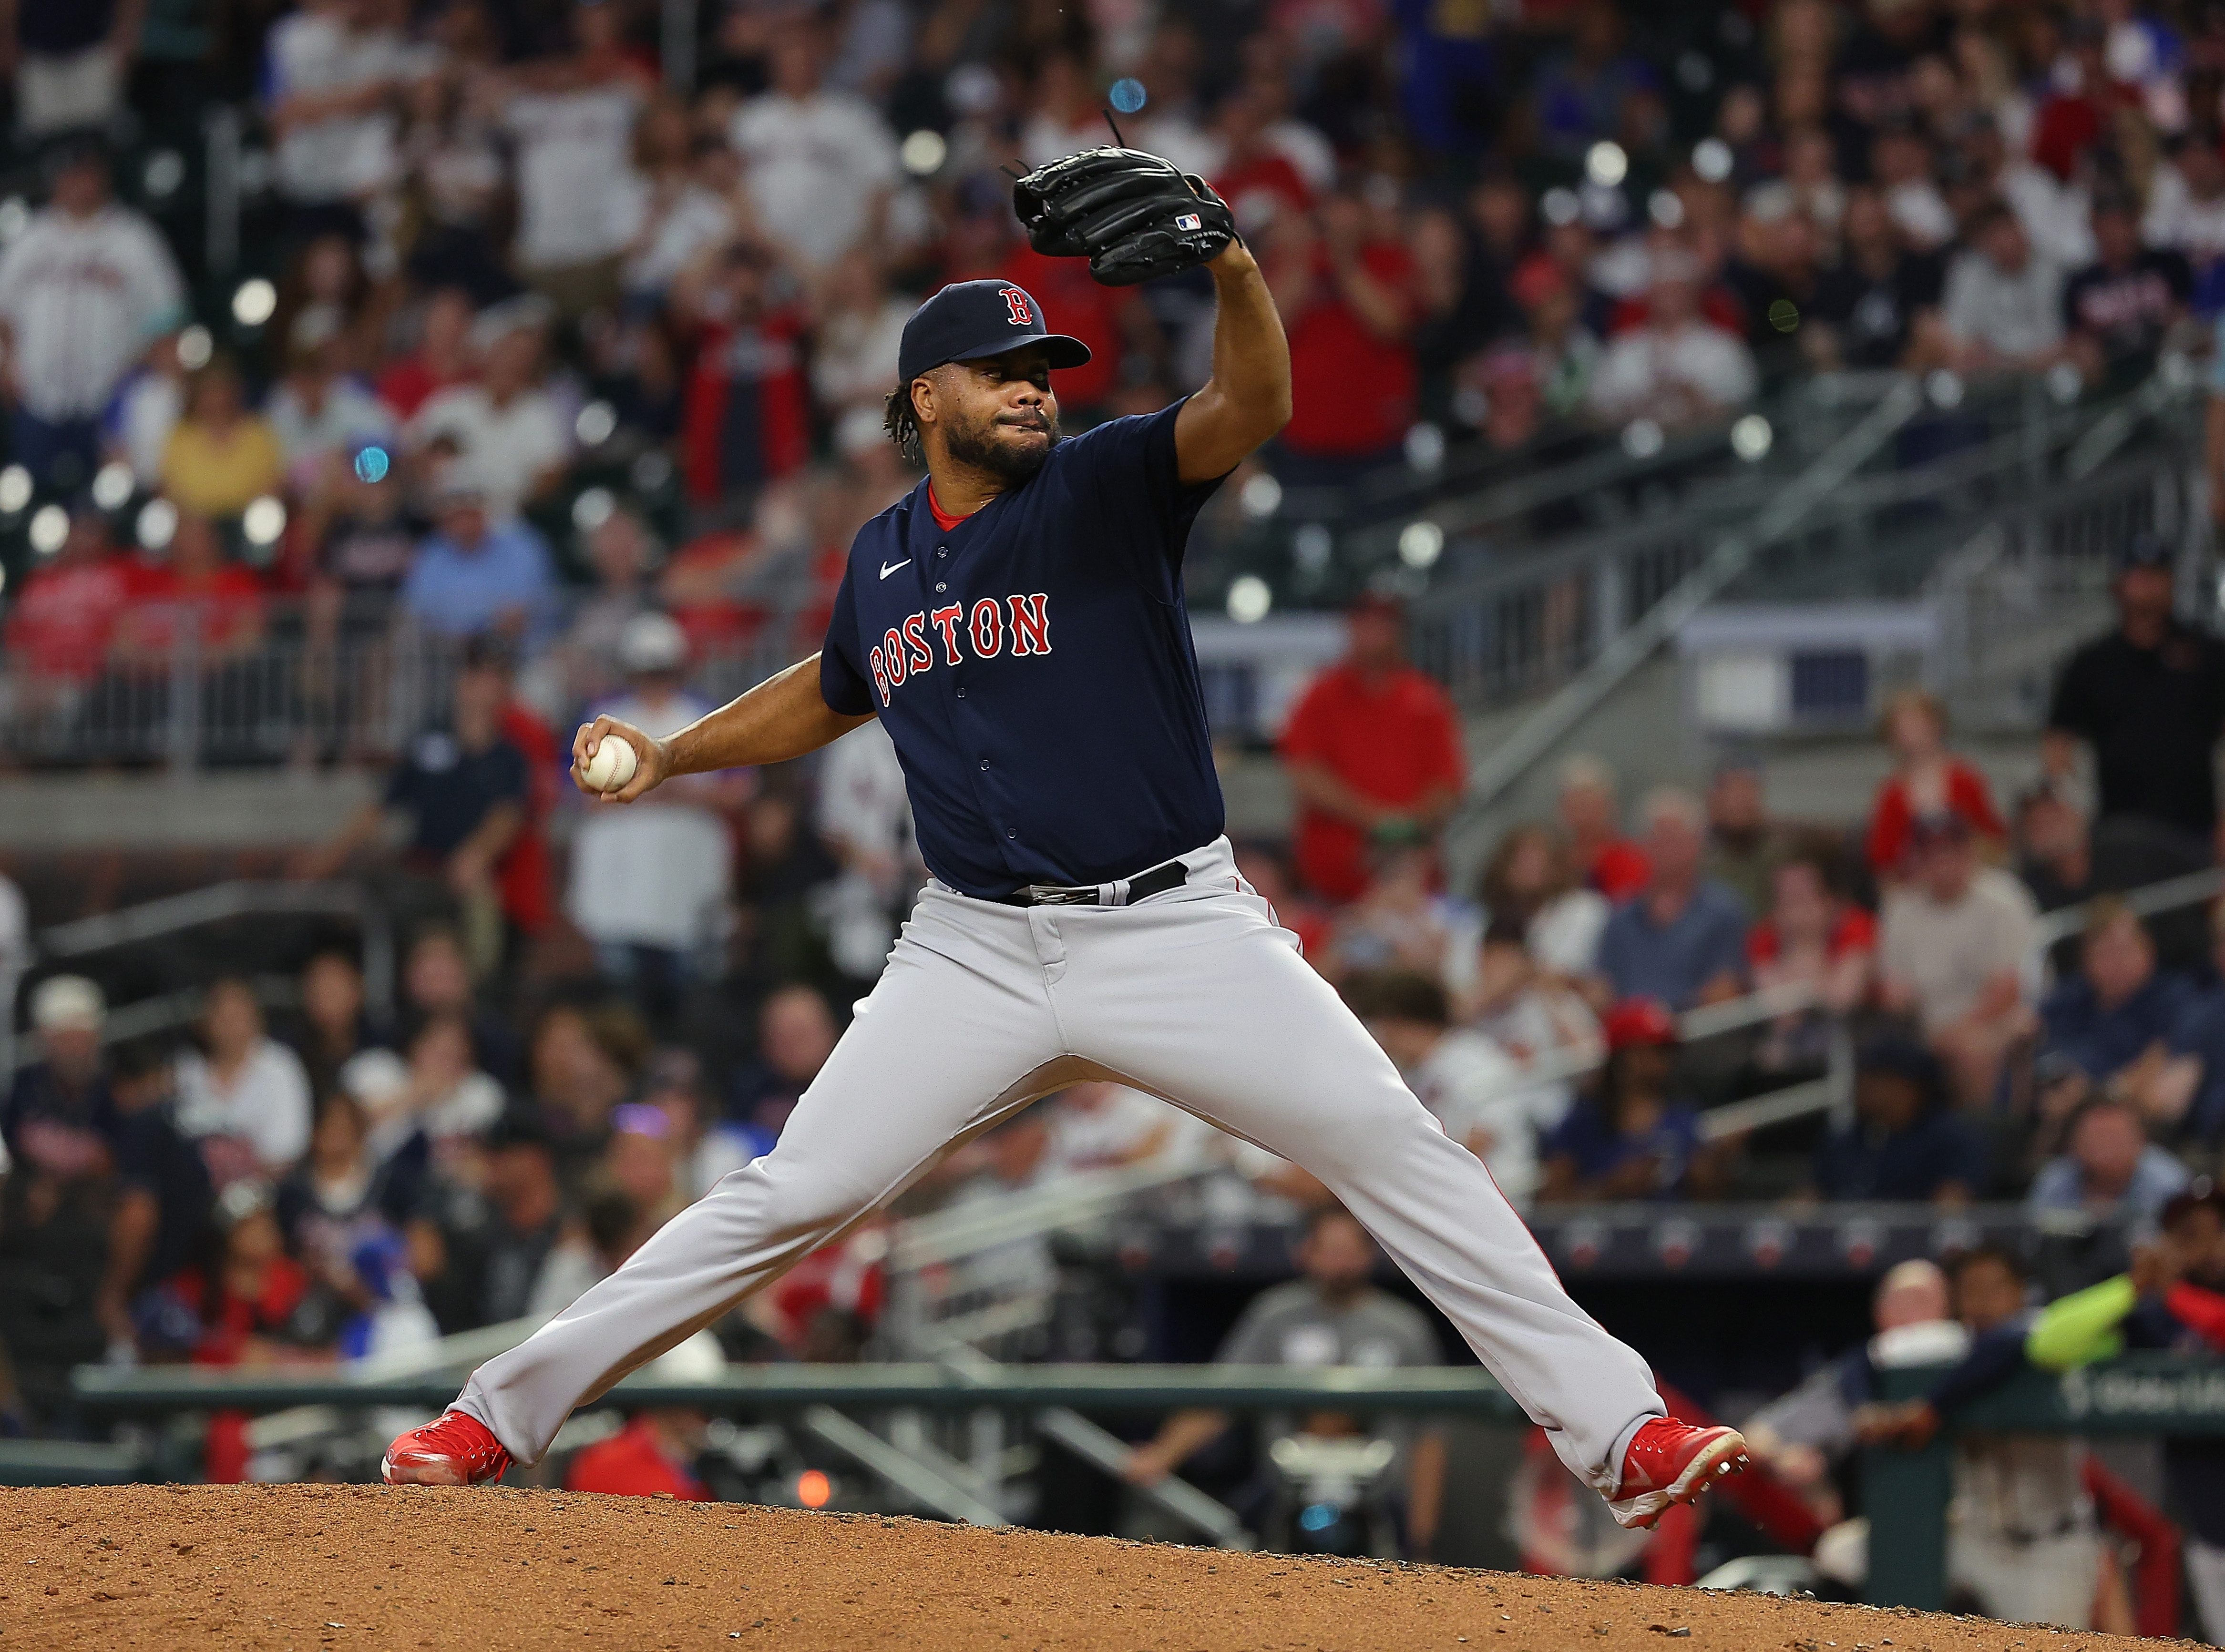 Kenley Jansen, Red Sox agree to deal